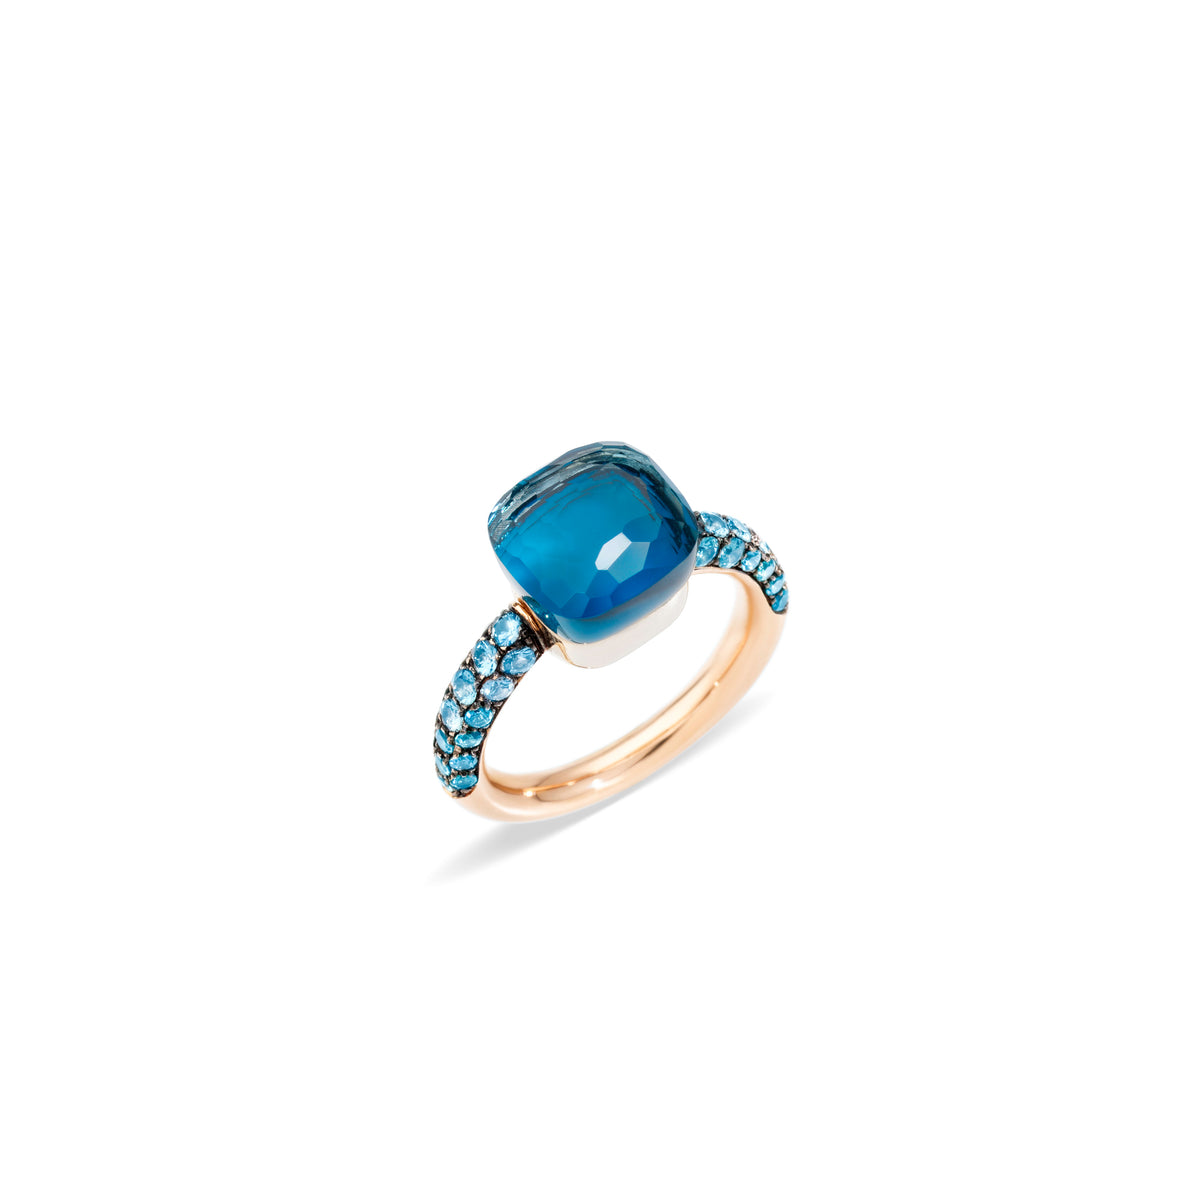 Nudo Deep Blue Ring in 18k Rose Gold and White Gold with London Blue Topaz, Turquoise and Diffused Topaz - Orsini Jewellers NZ